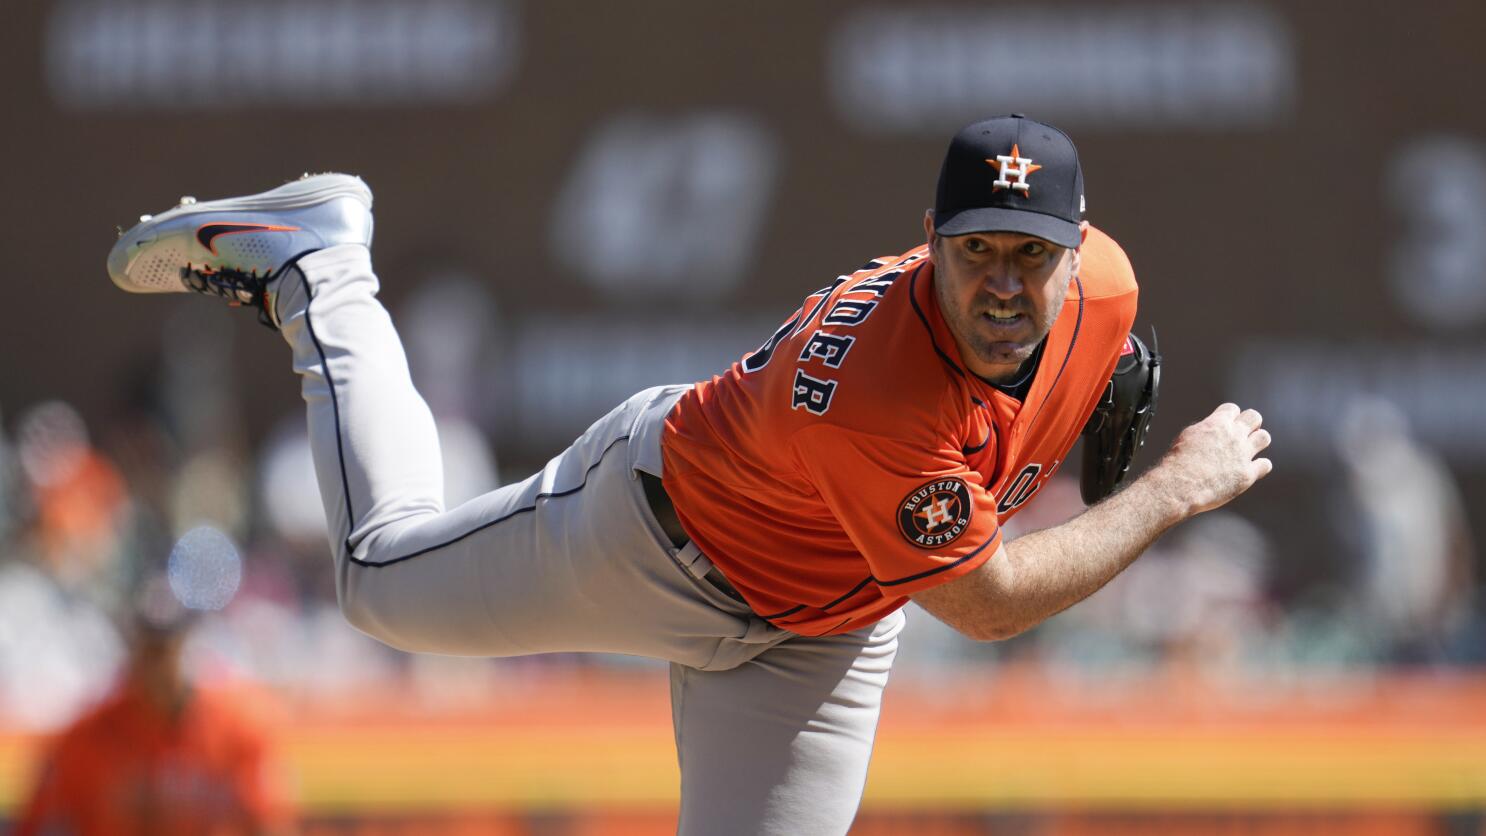 REPORT: Detroit Tigers to face both Justin Verlander and Max